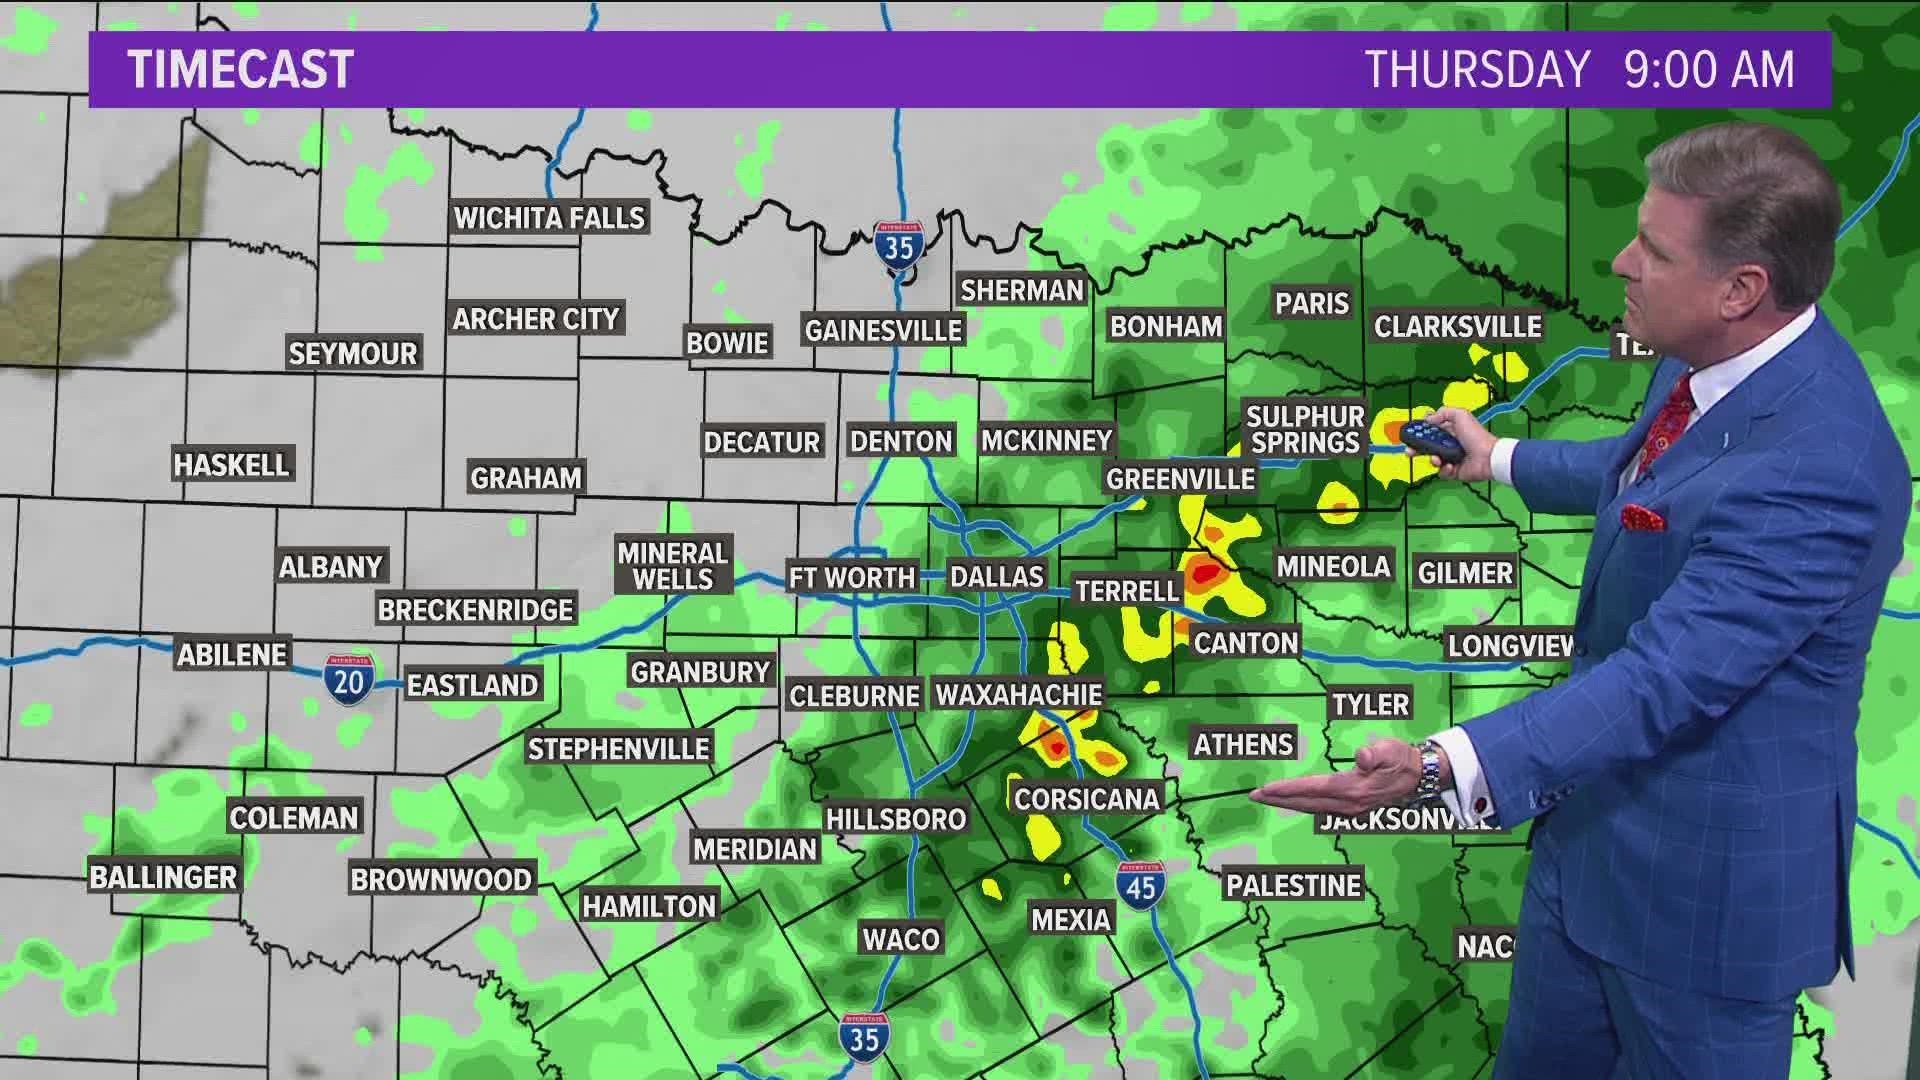 Widespread rain is expected throughout North Texas on Thanksgiving Day.